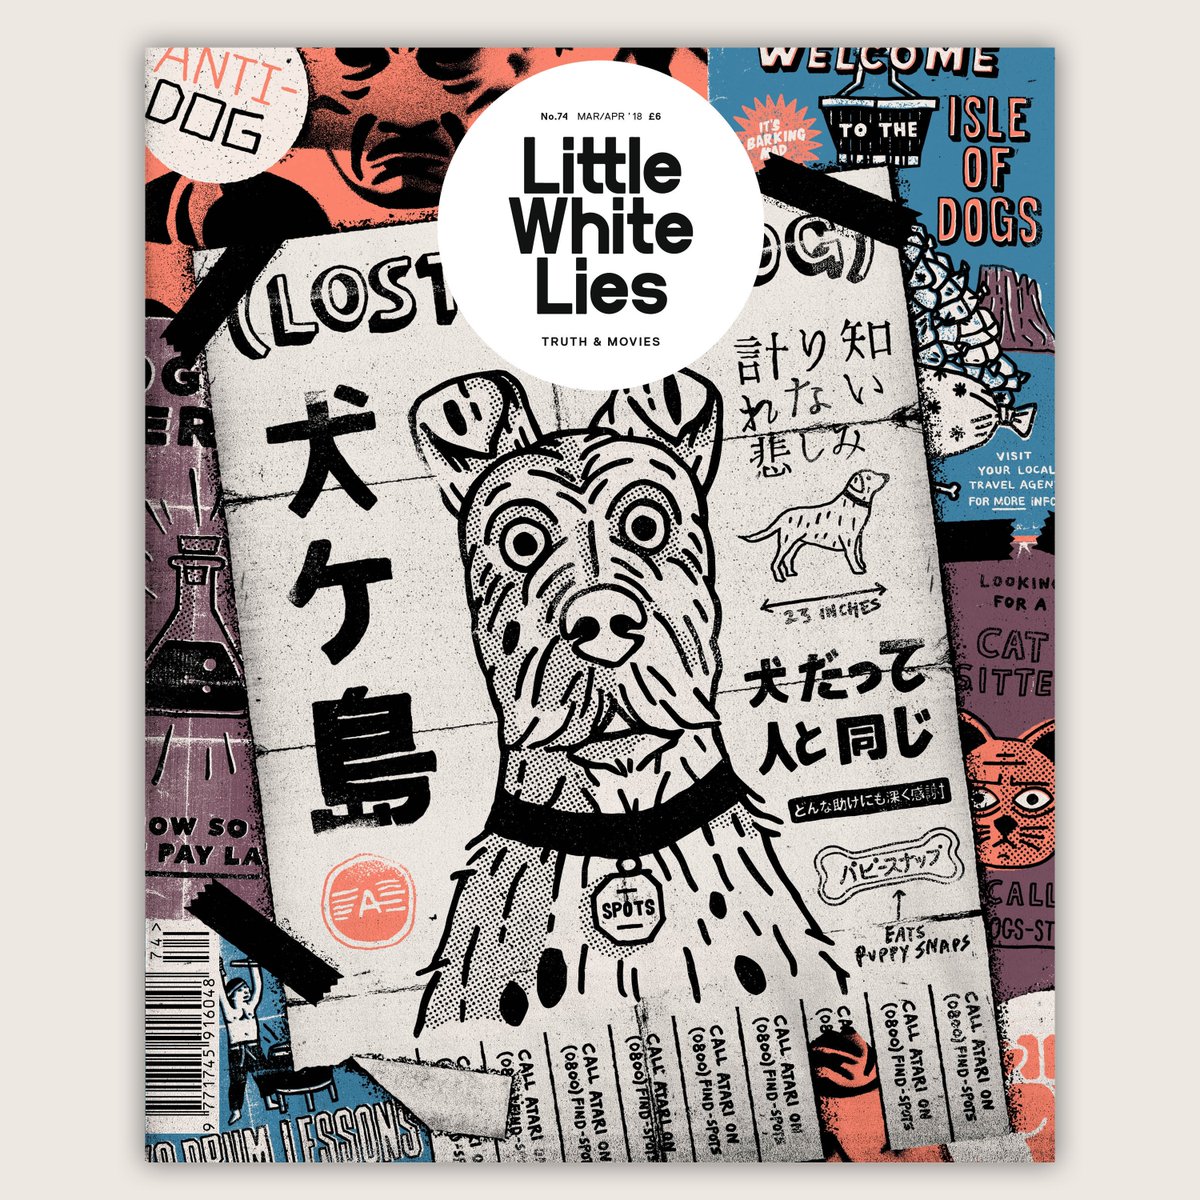 Little White Lies #74: Isle of Dogs